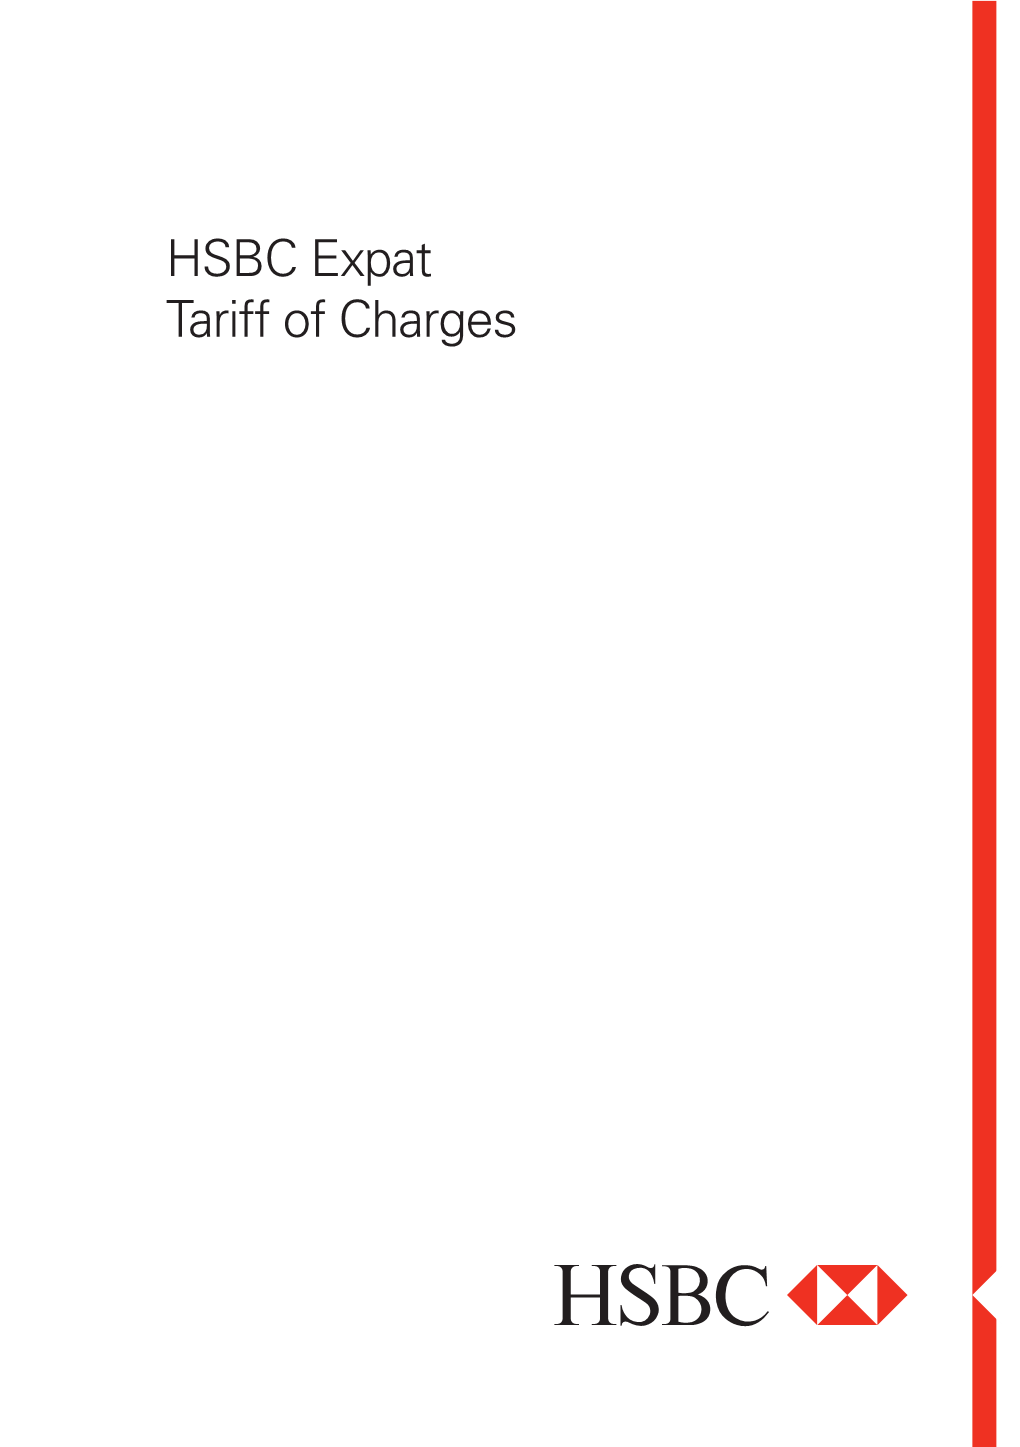 HSBC Expat Tariff of Charges the Information, Rates and Prices in This the Prices and Information in This Tariff Are Correct As at 1 October 2017